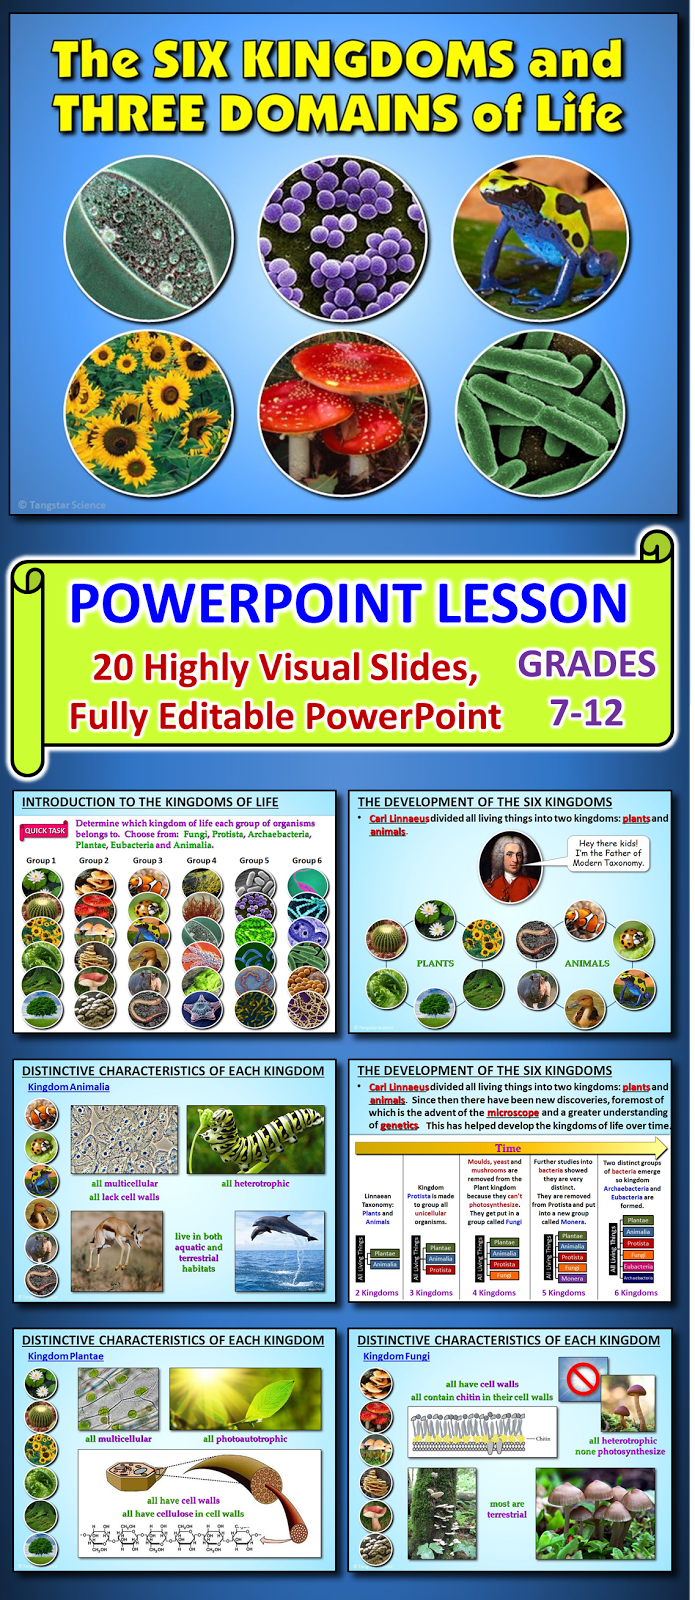 6 KINGDOMS OF LIFE POWERPOINT